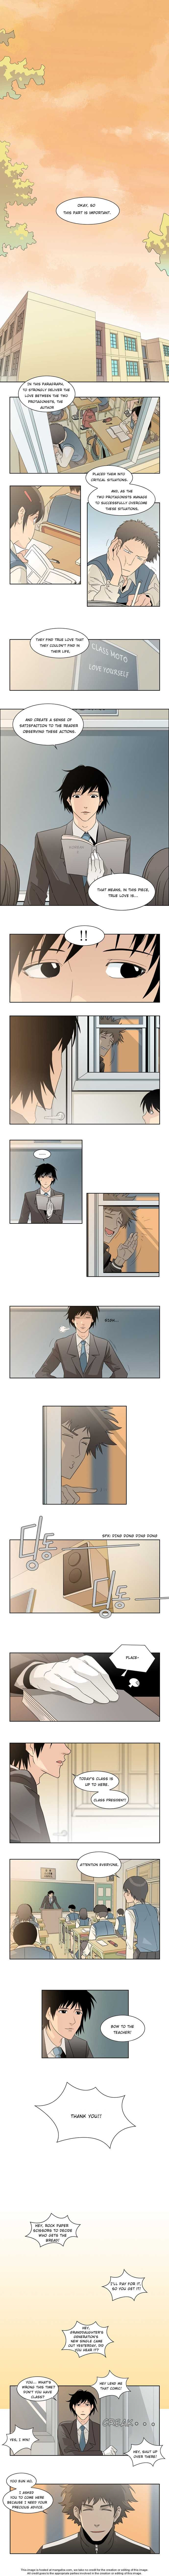 Melo Holic Chapter 001 page 2